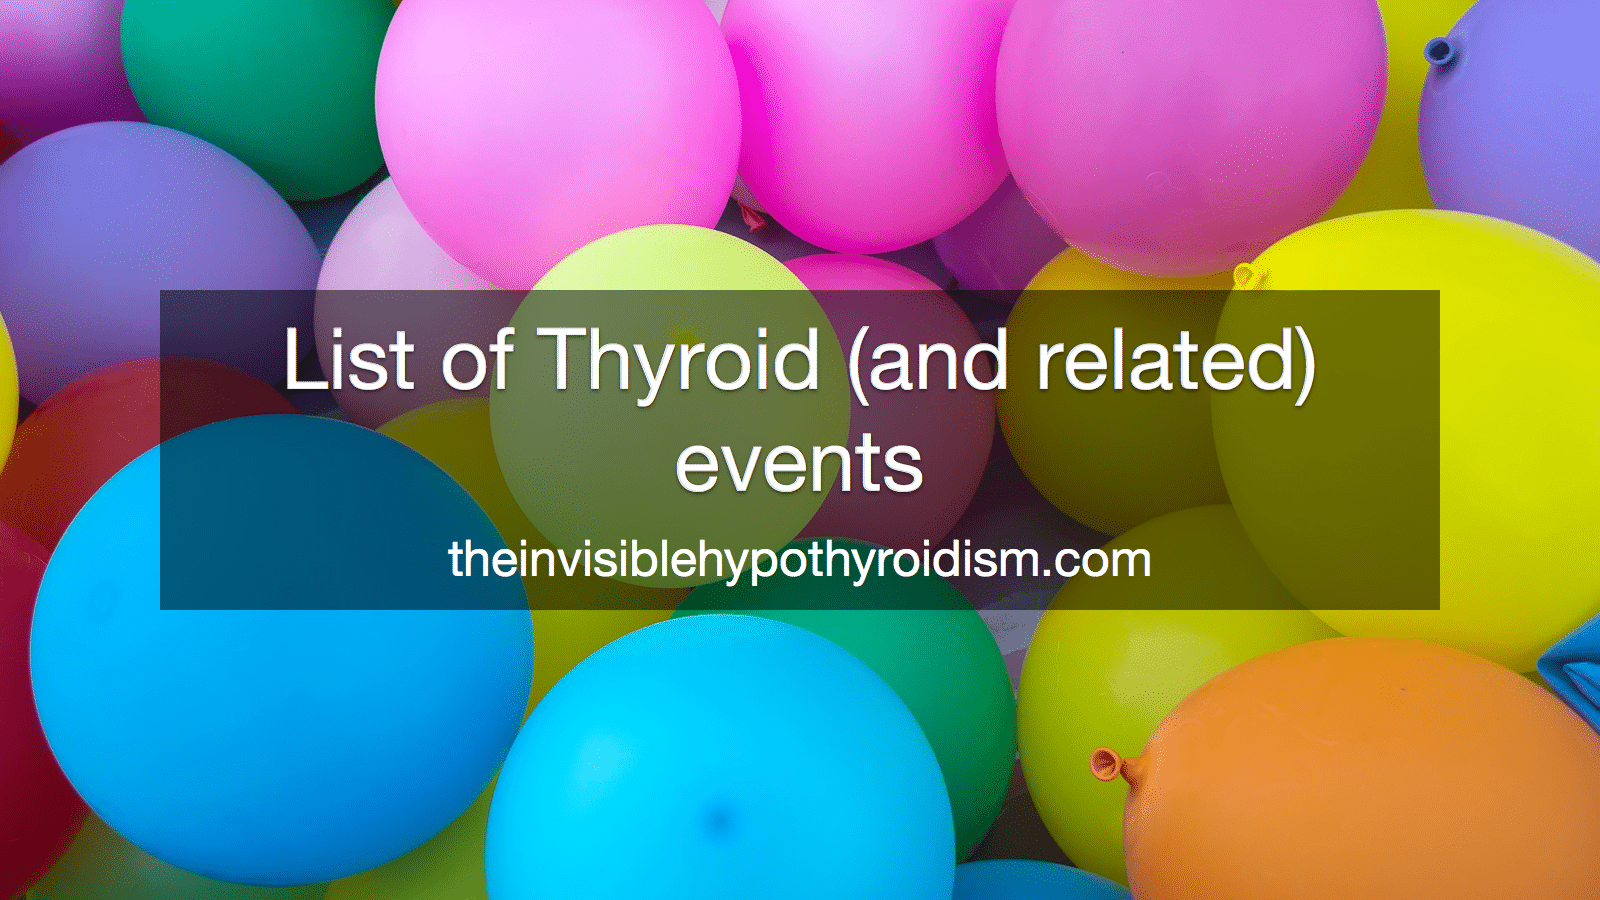 List of Thyroid (and related) events